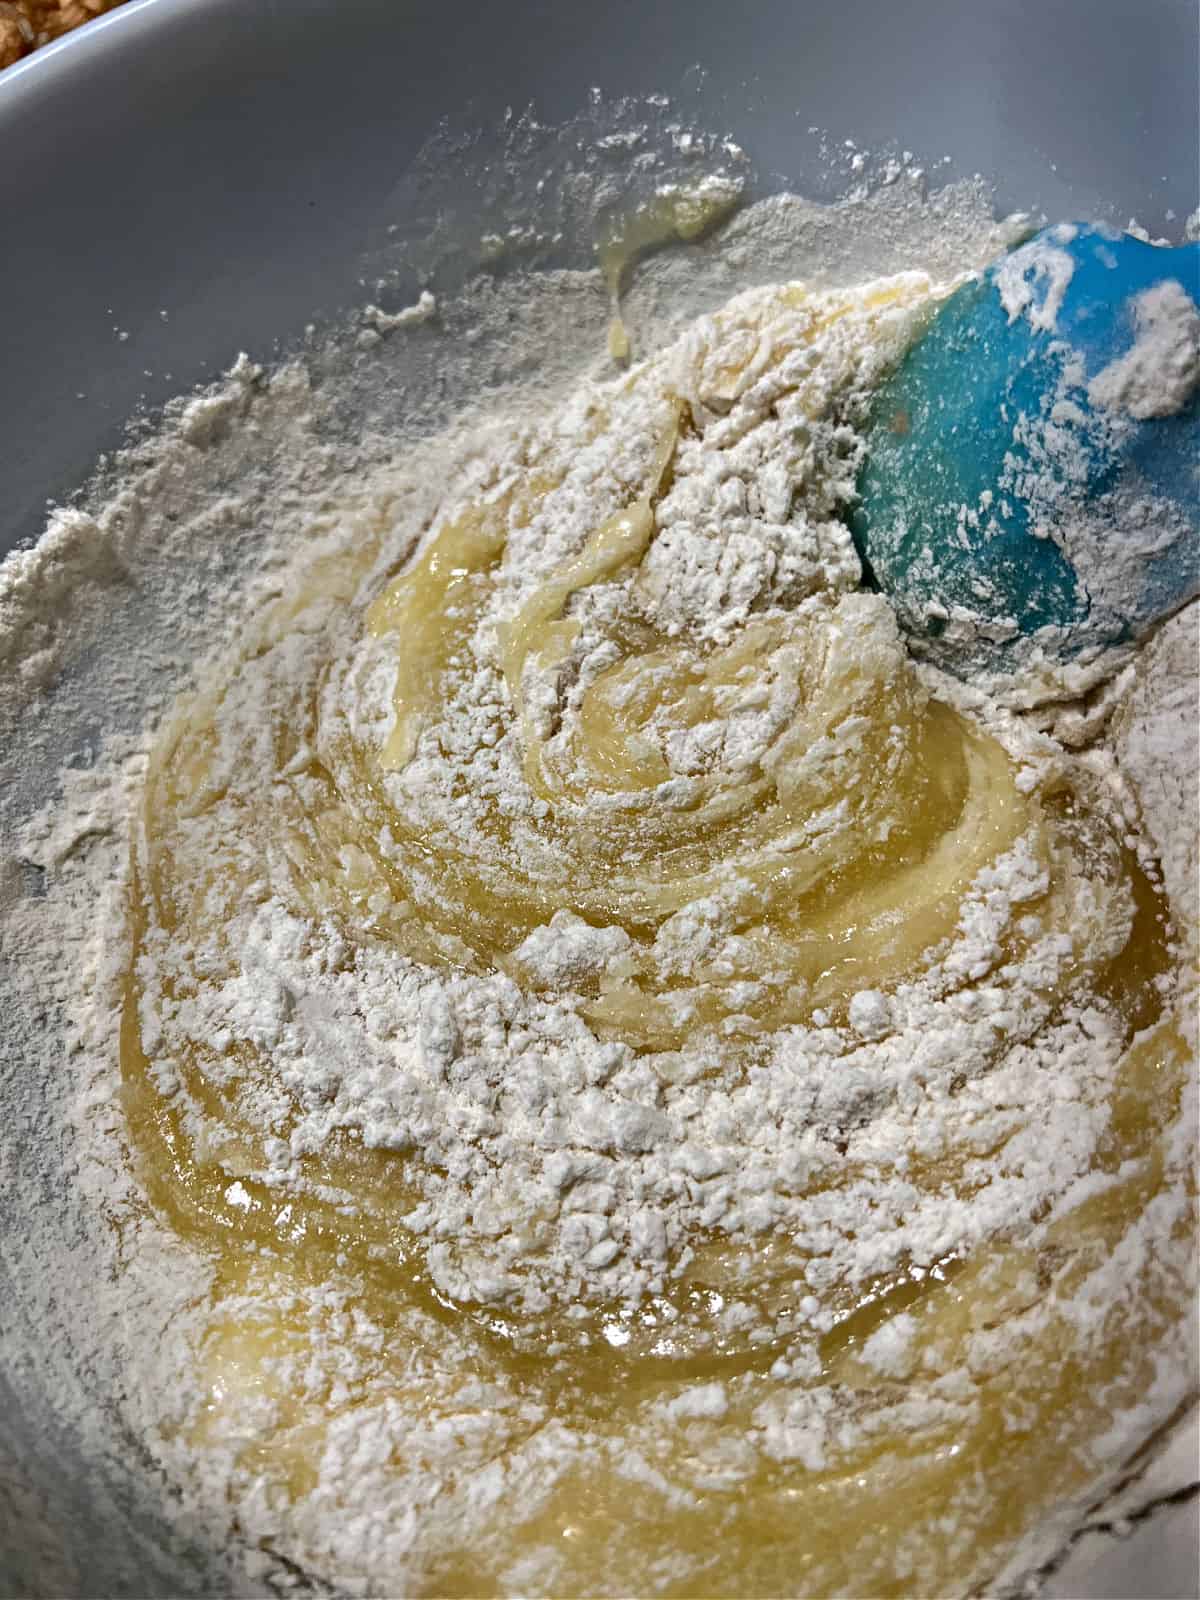 Mixing dry ingredients into the batter.